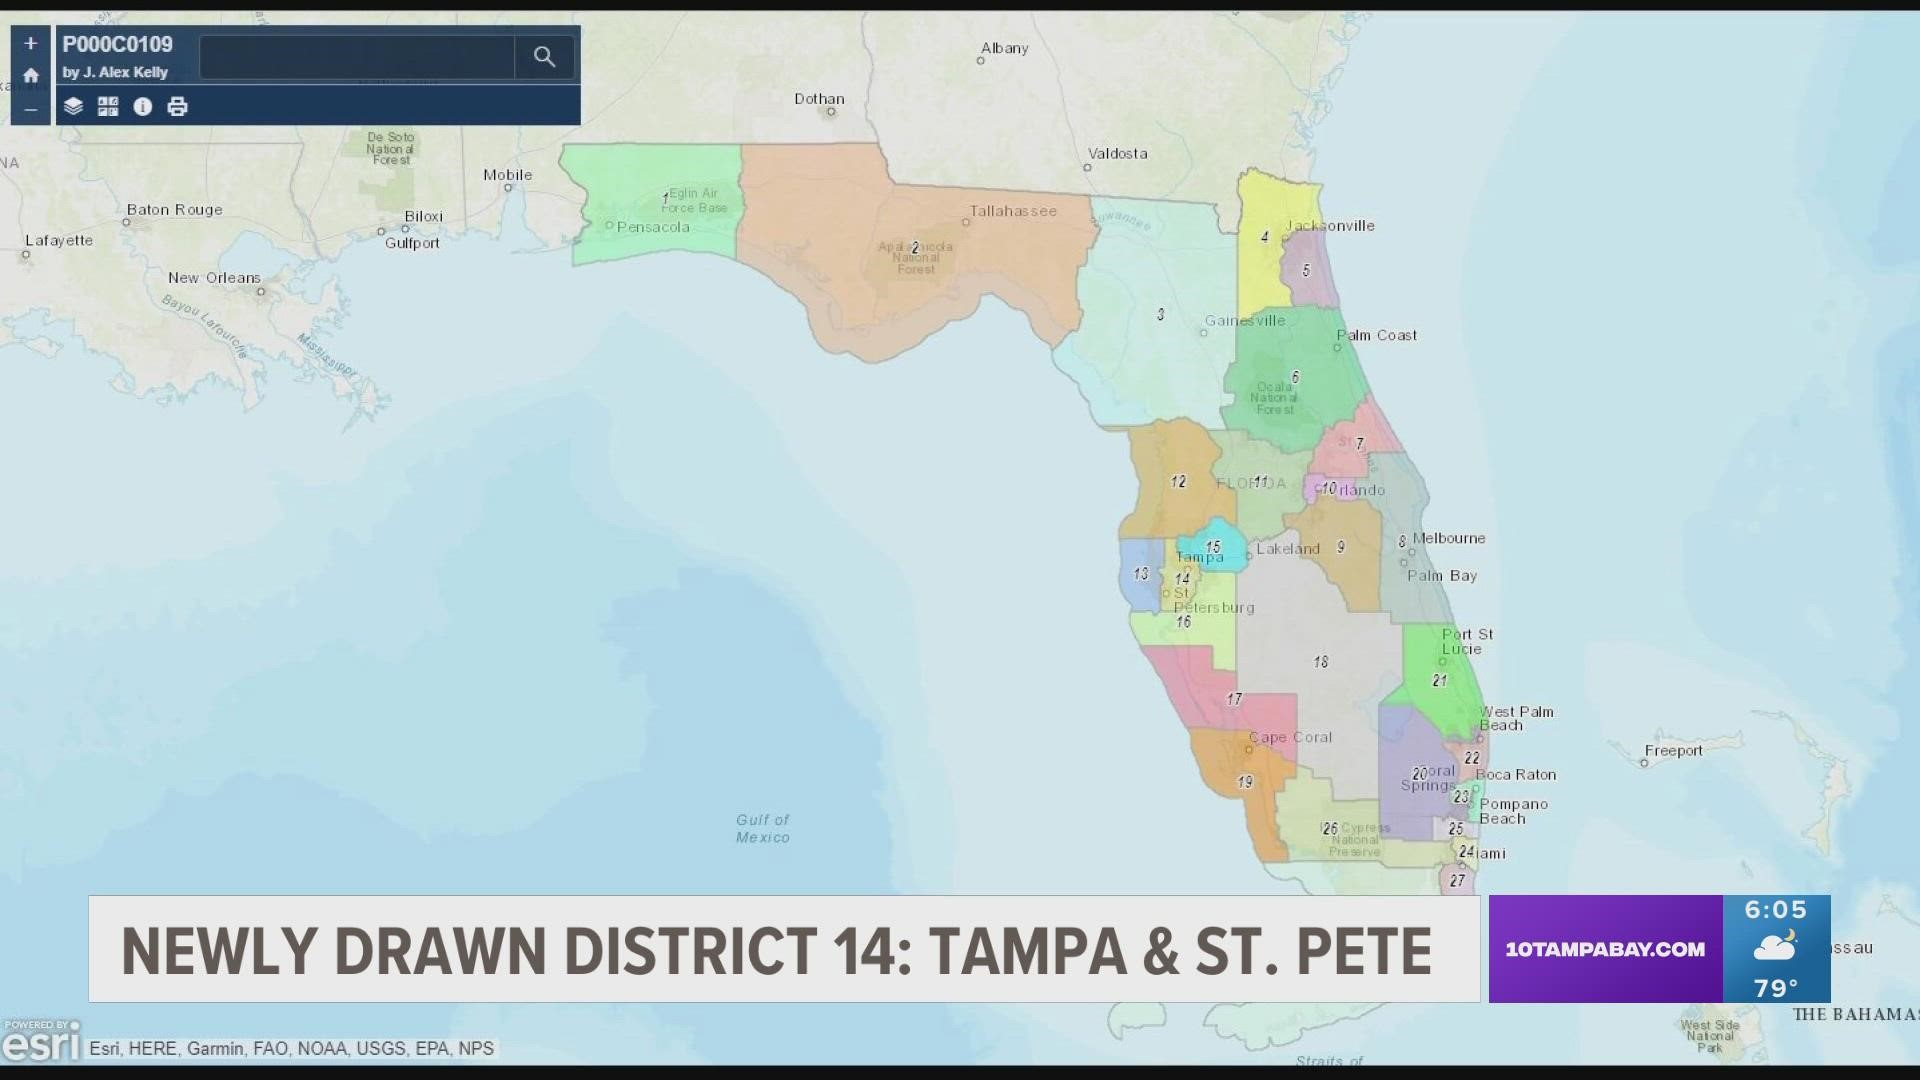 The new political lines pushes part of St. Petersburg into District 14, an already Democratic stronghold.